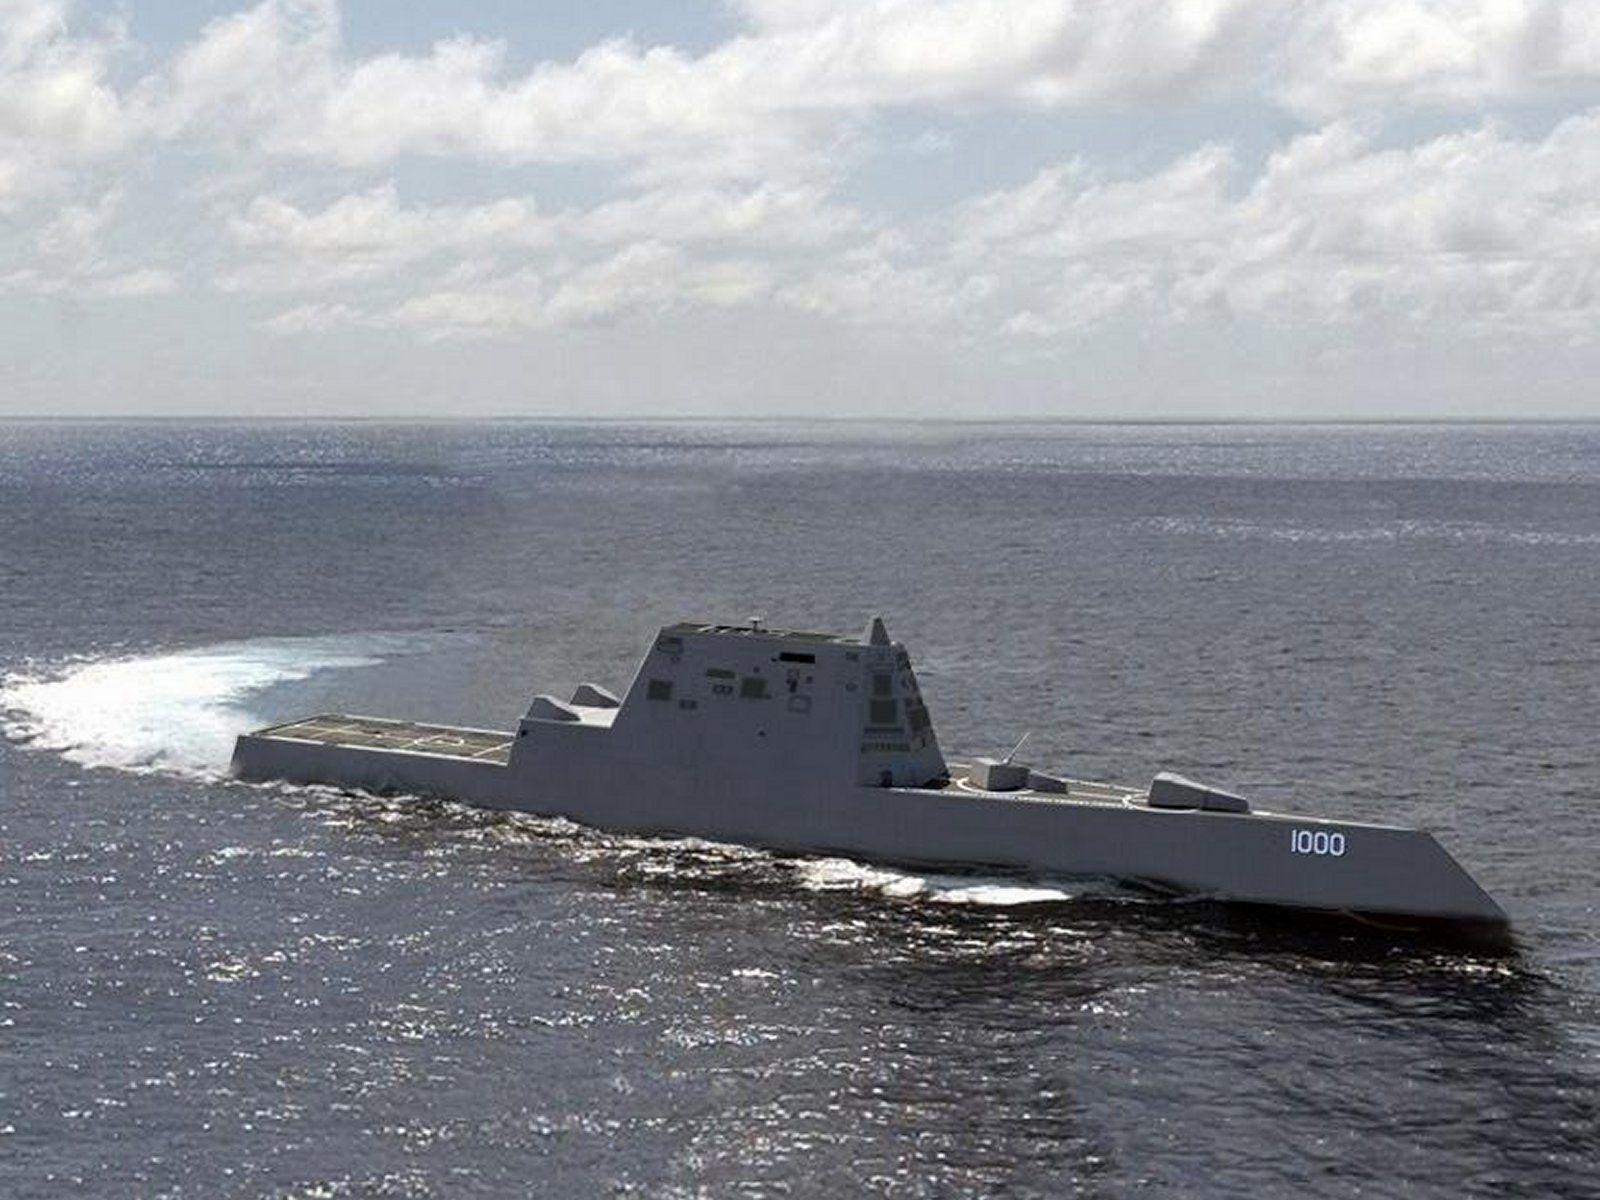 The Zumwalt Class Destroyer (DDG 1000) Is A Planned Class Of United